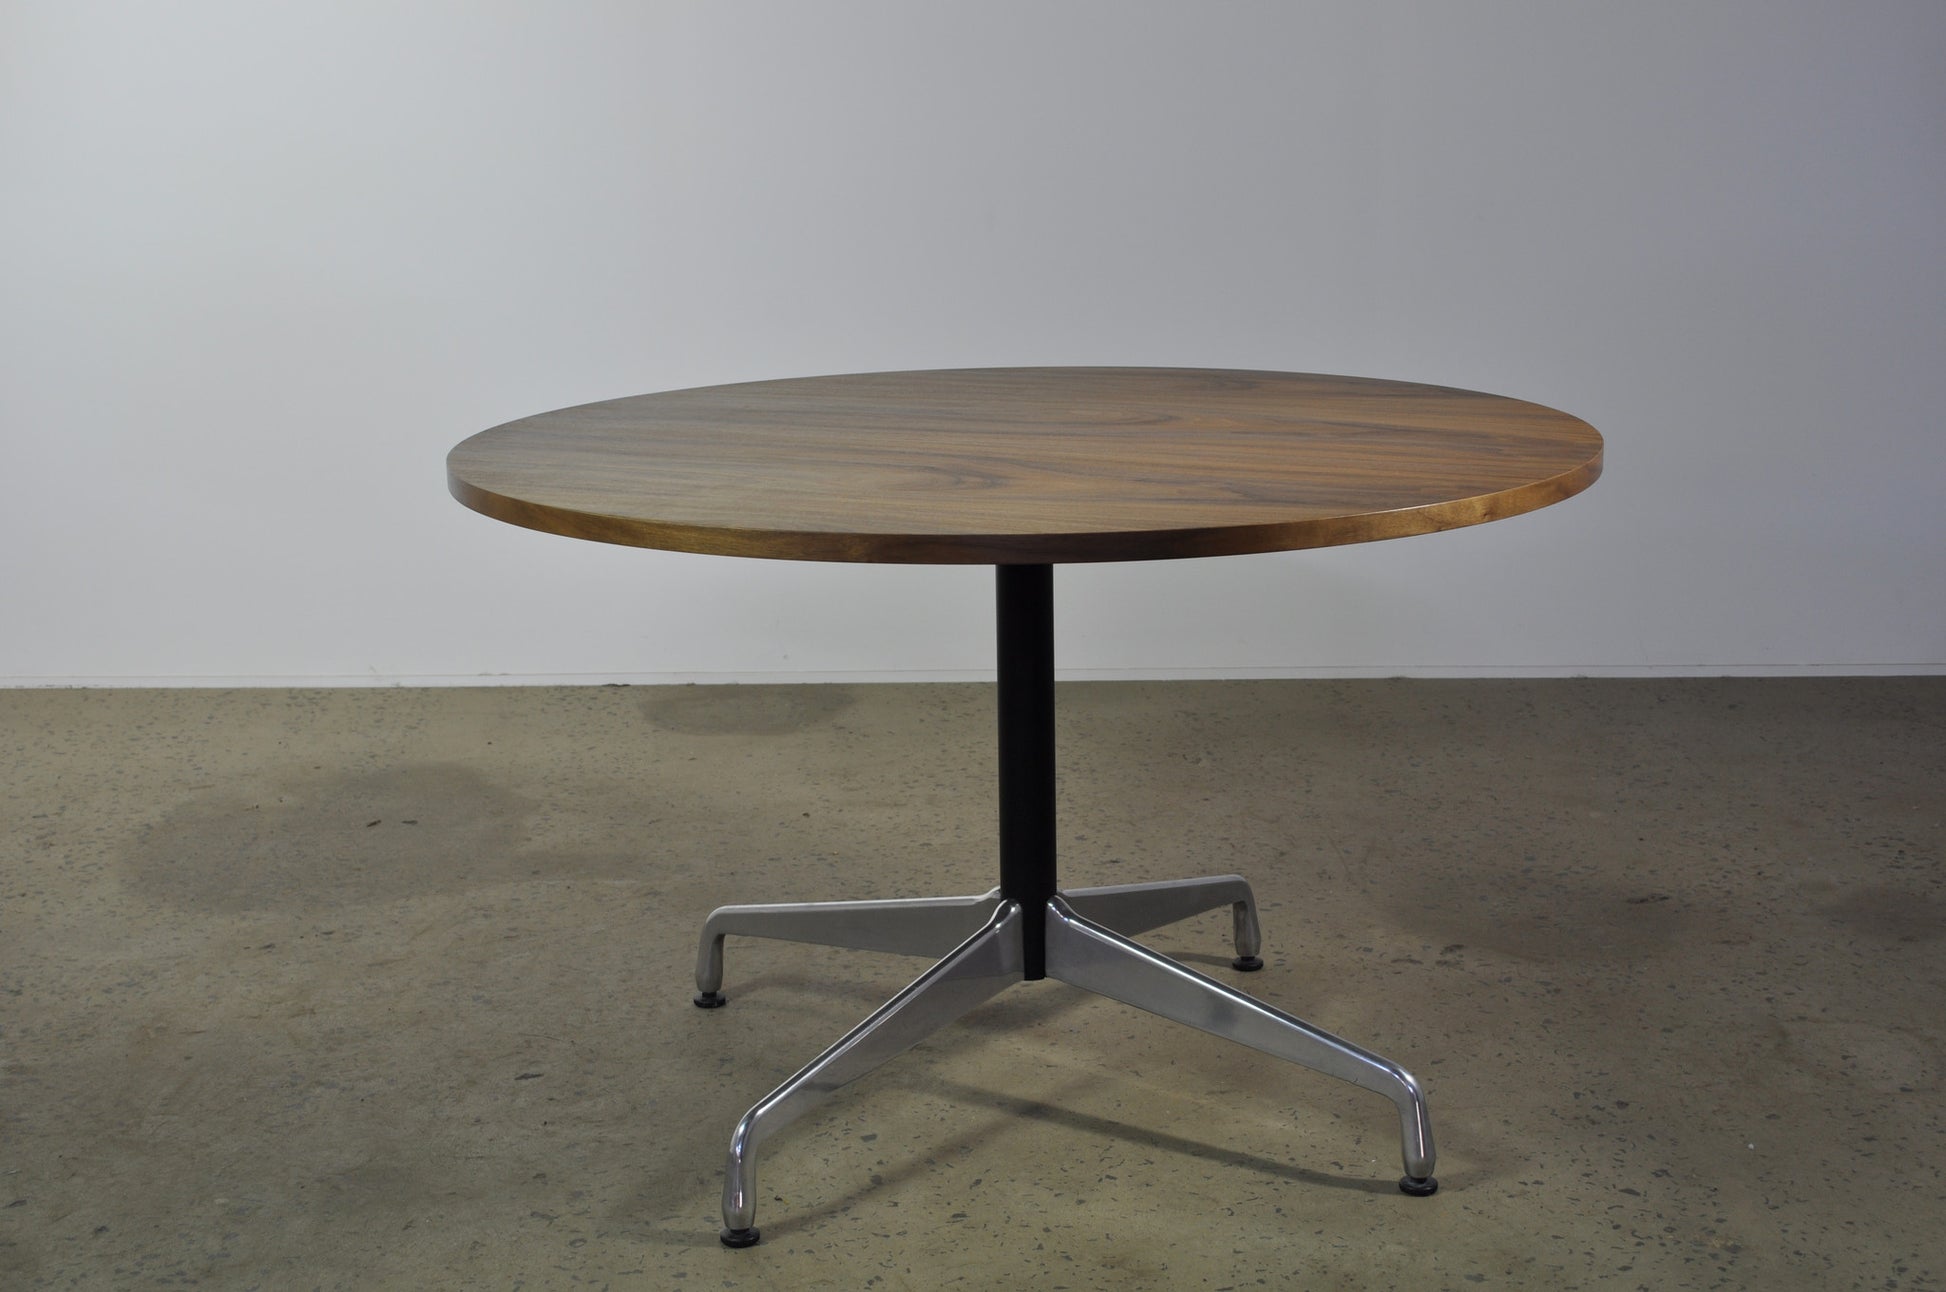 Eames Round American Walnut table - Case 22